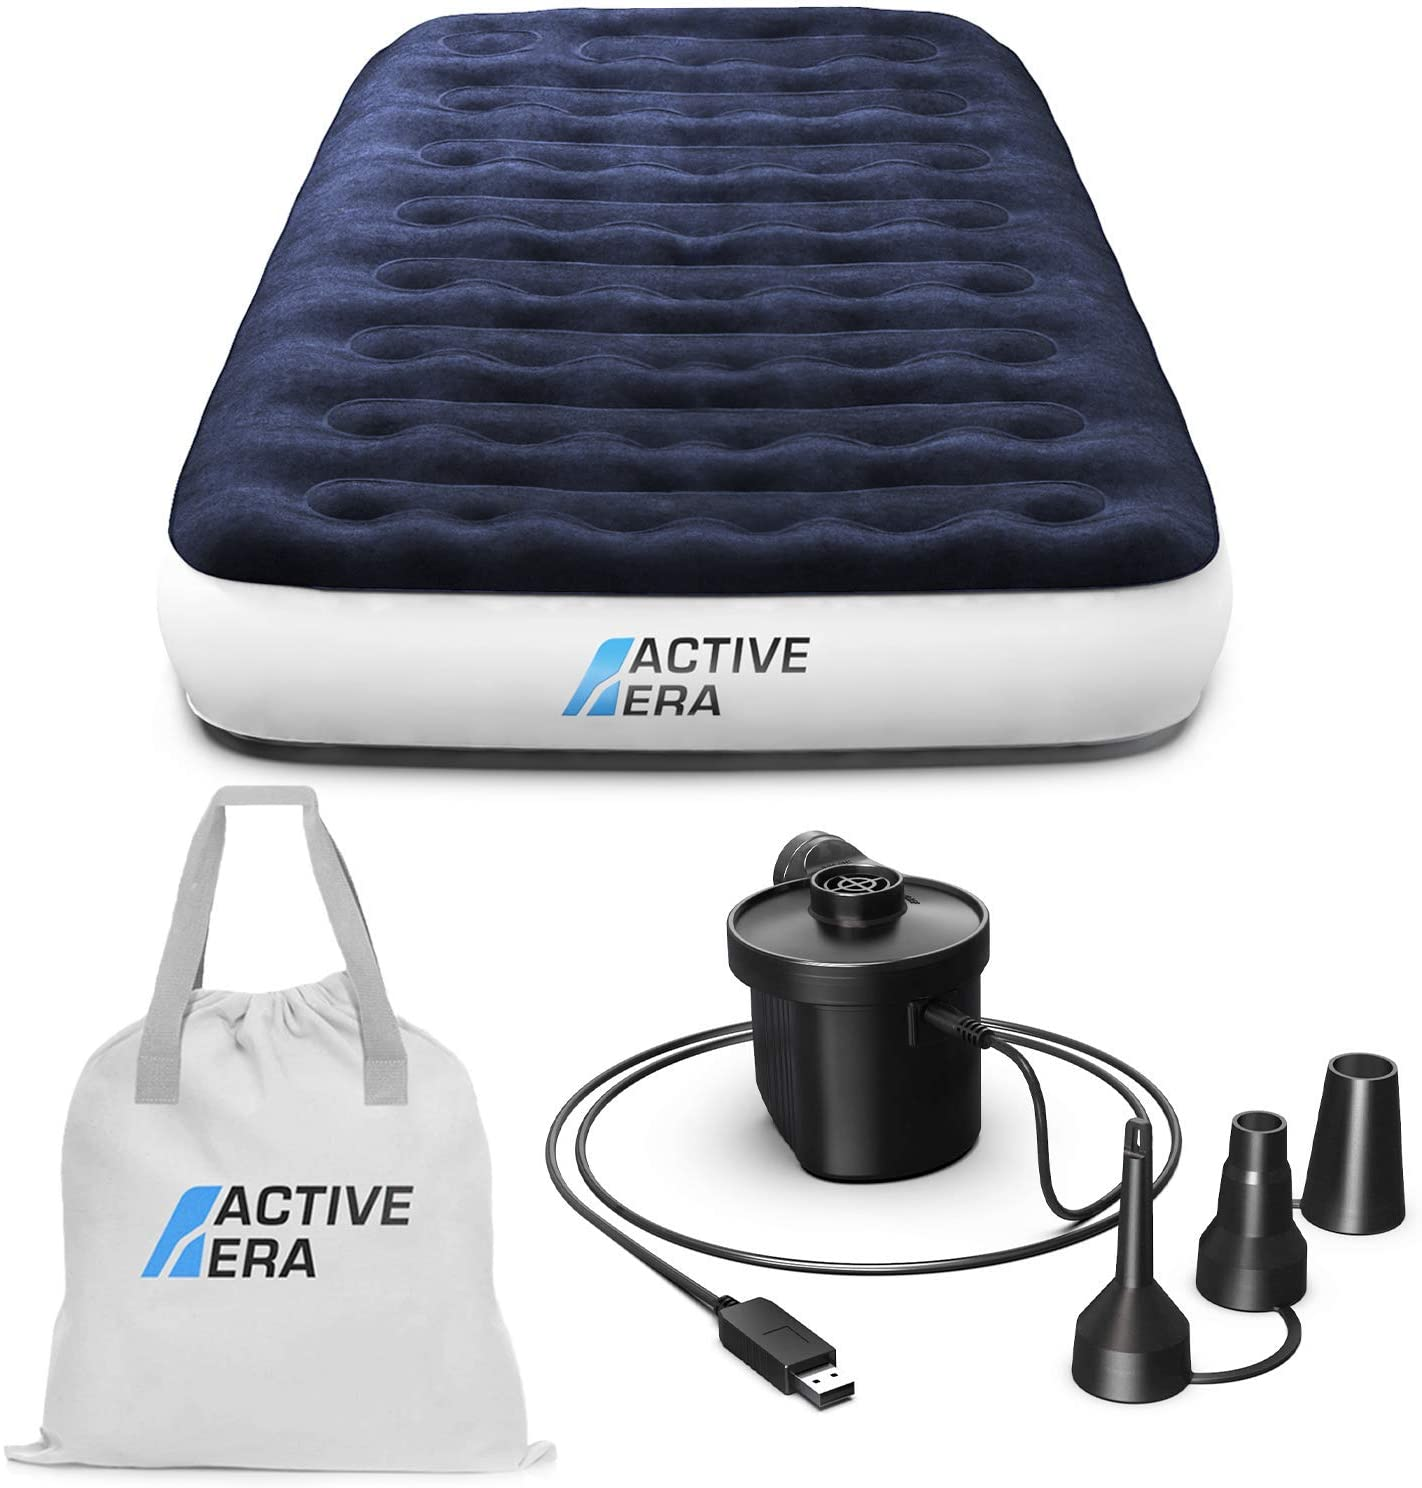 When choosing an air bed or camping cot for camping, the extra comfort of an air bed could be the deciding factor.